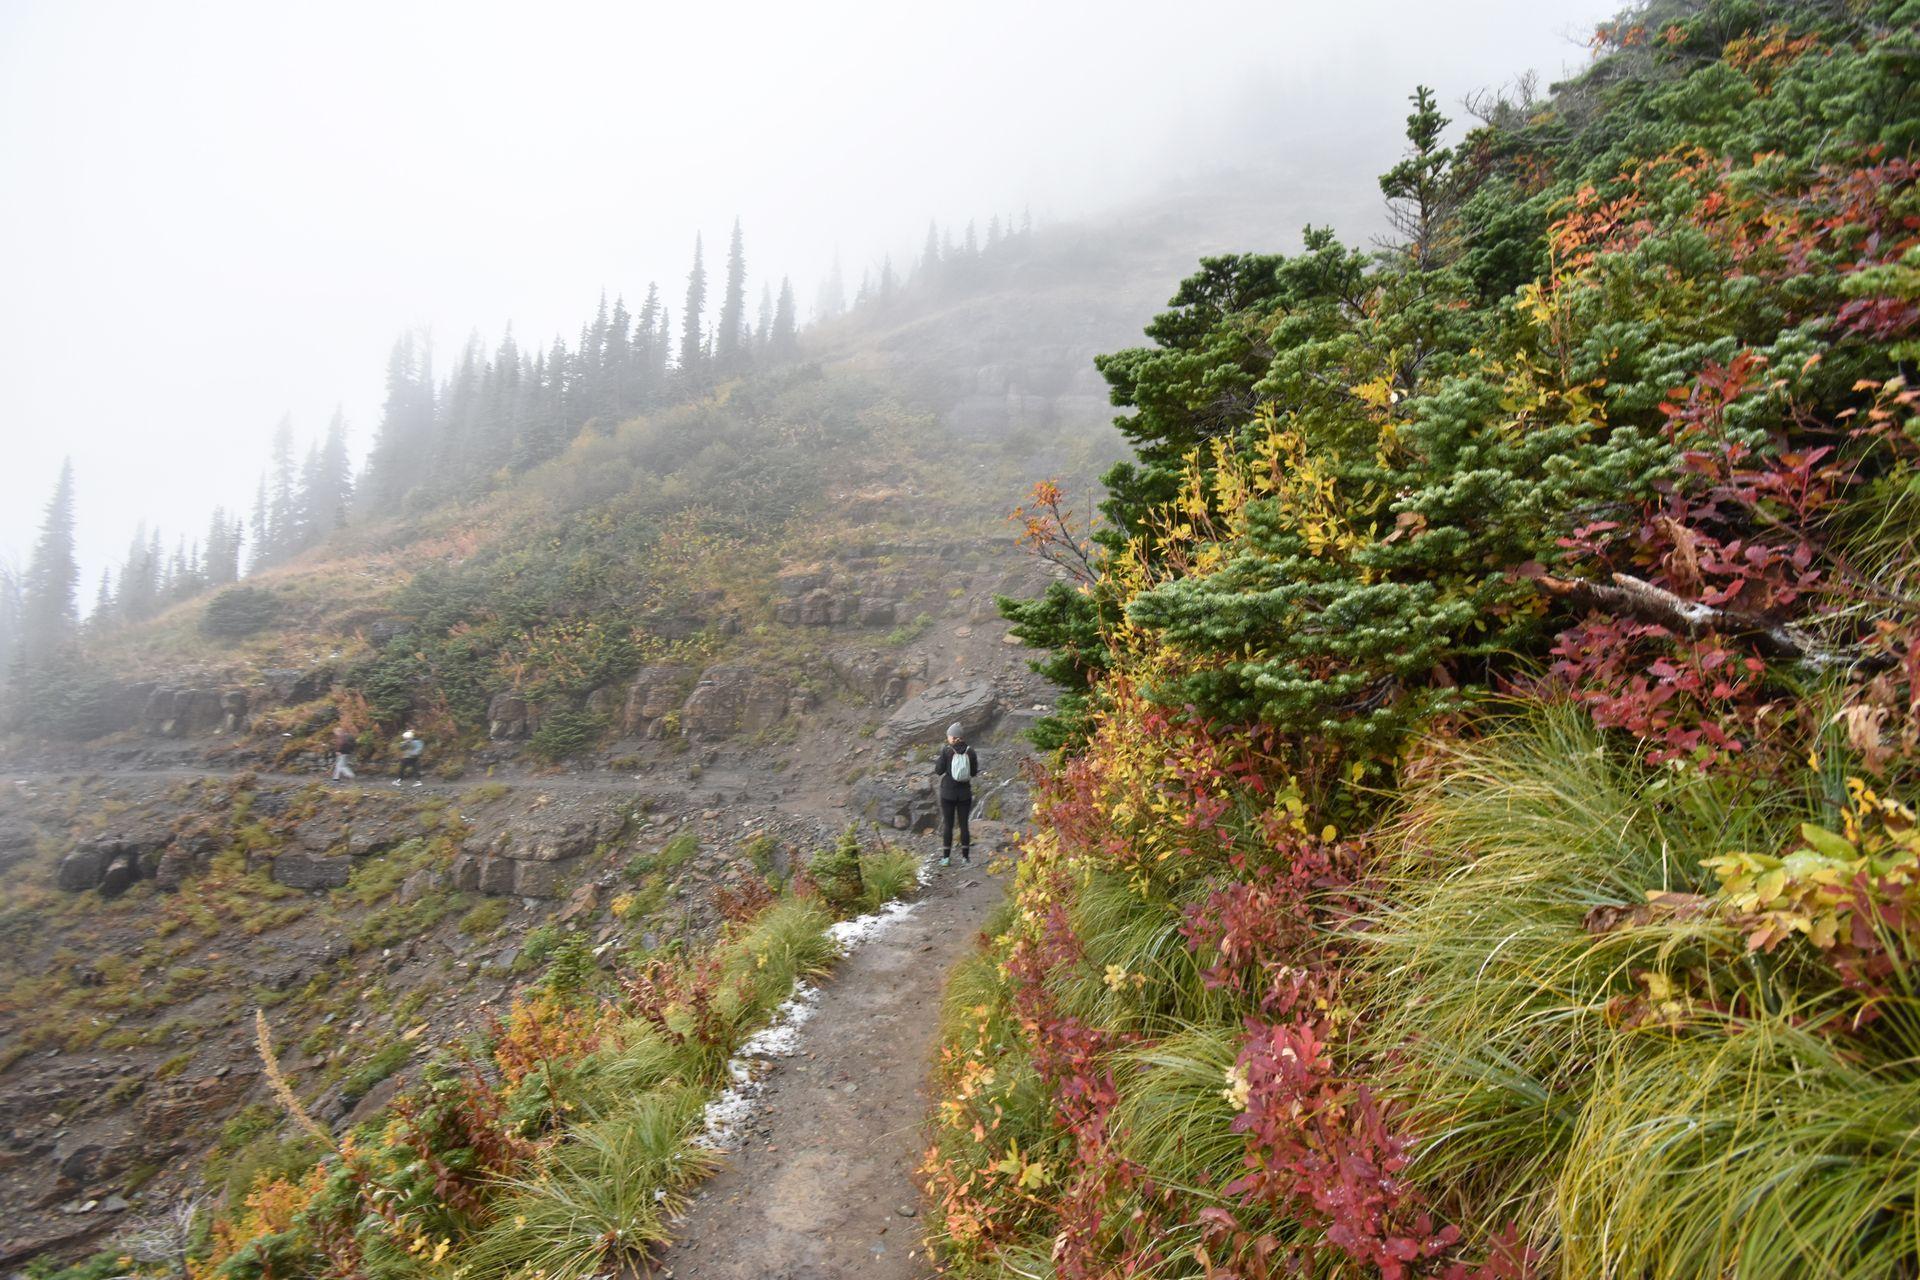 A hiker on the Highline Trail with a close up of red and yellow plants next to the trail. There is a lot of fog covering the trees ahead.